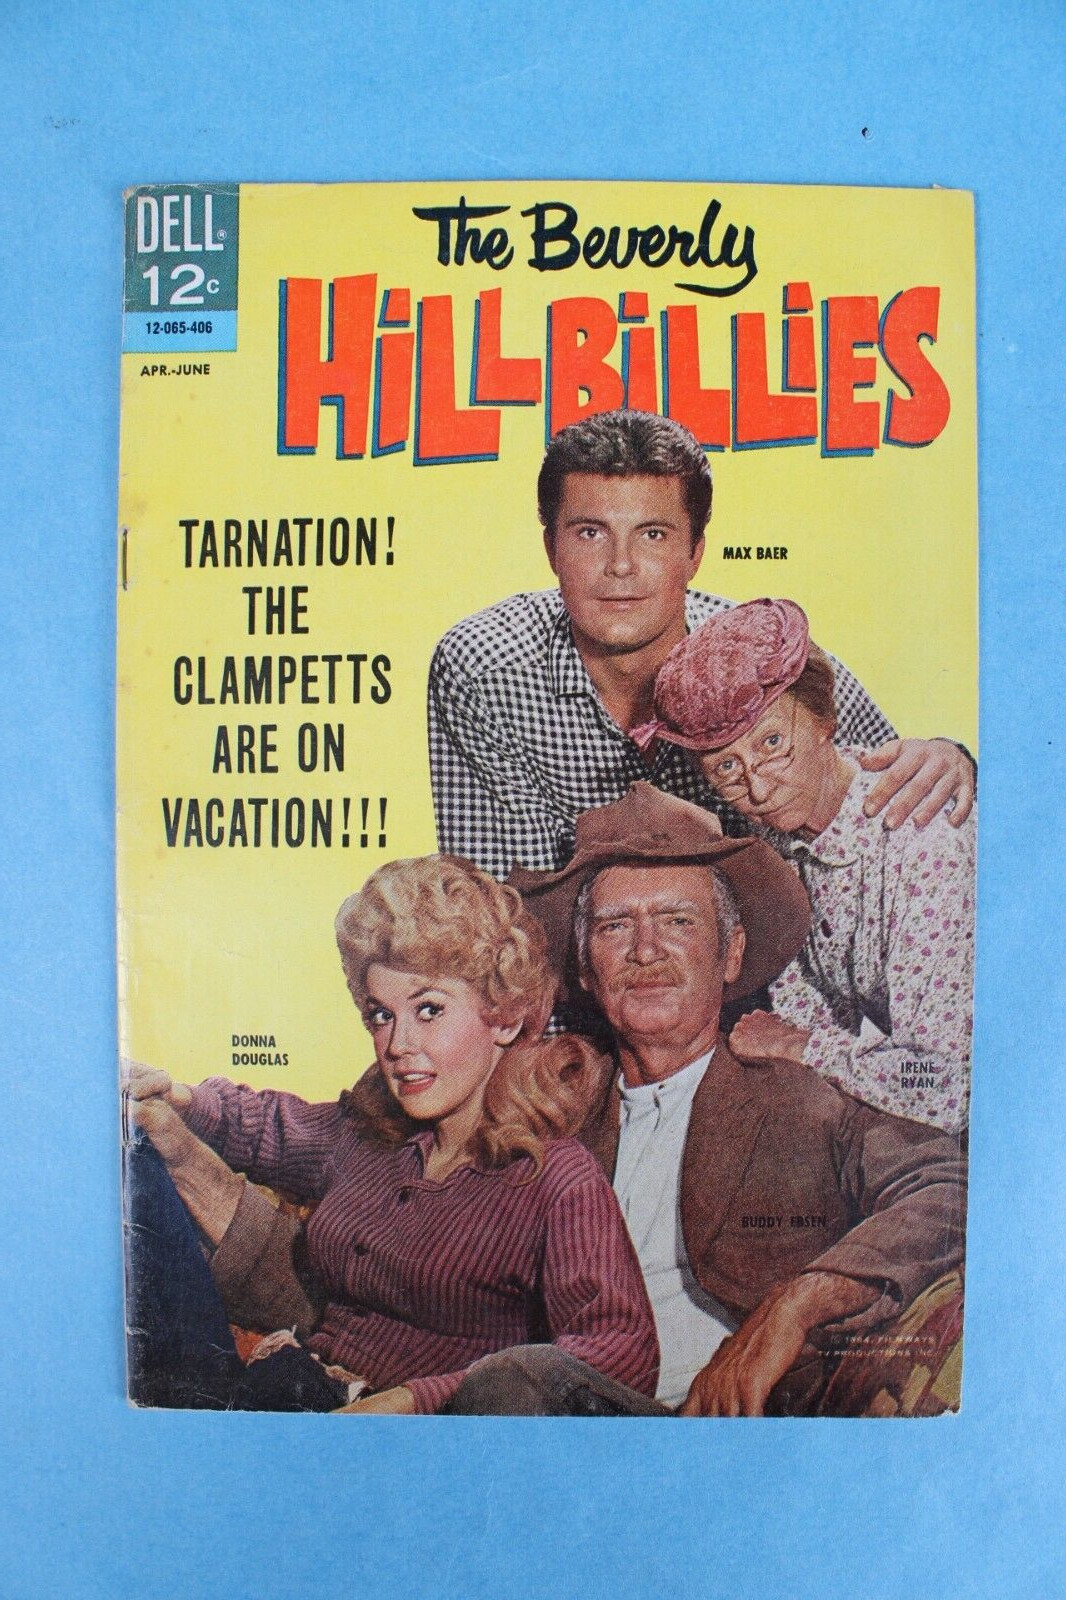 VINTAGE 1964 DELL No. 5 BEVERLY HILLBILLIES COMIC BOOK